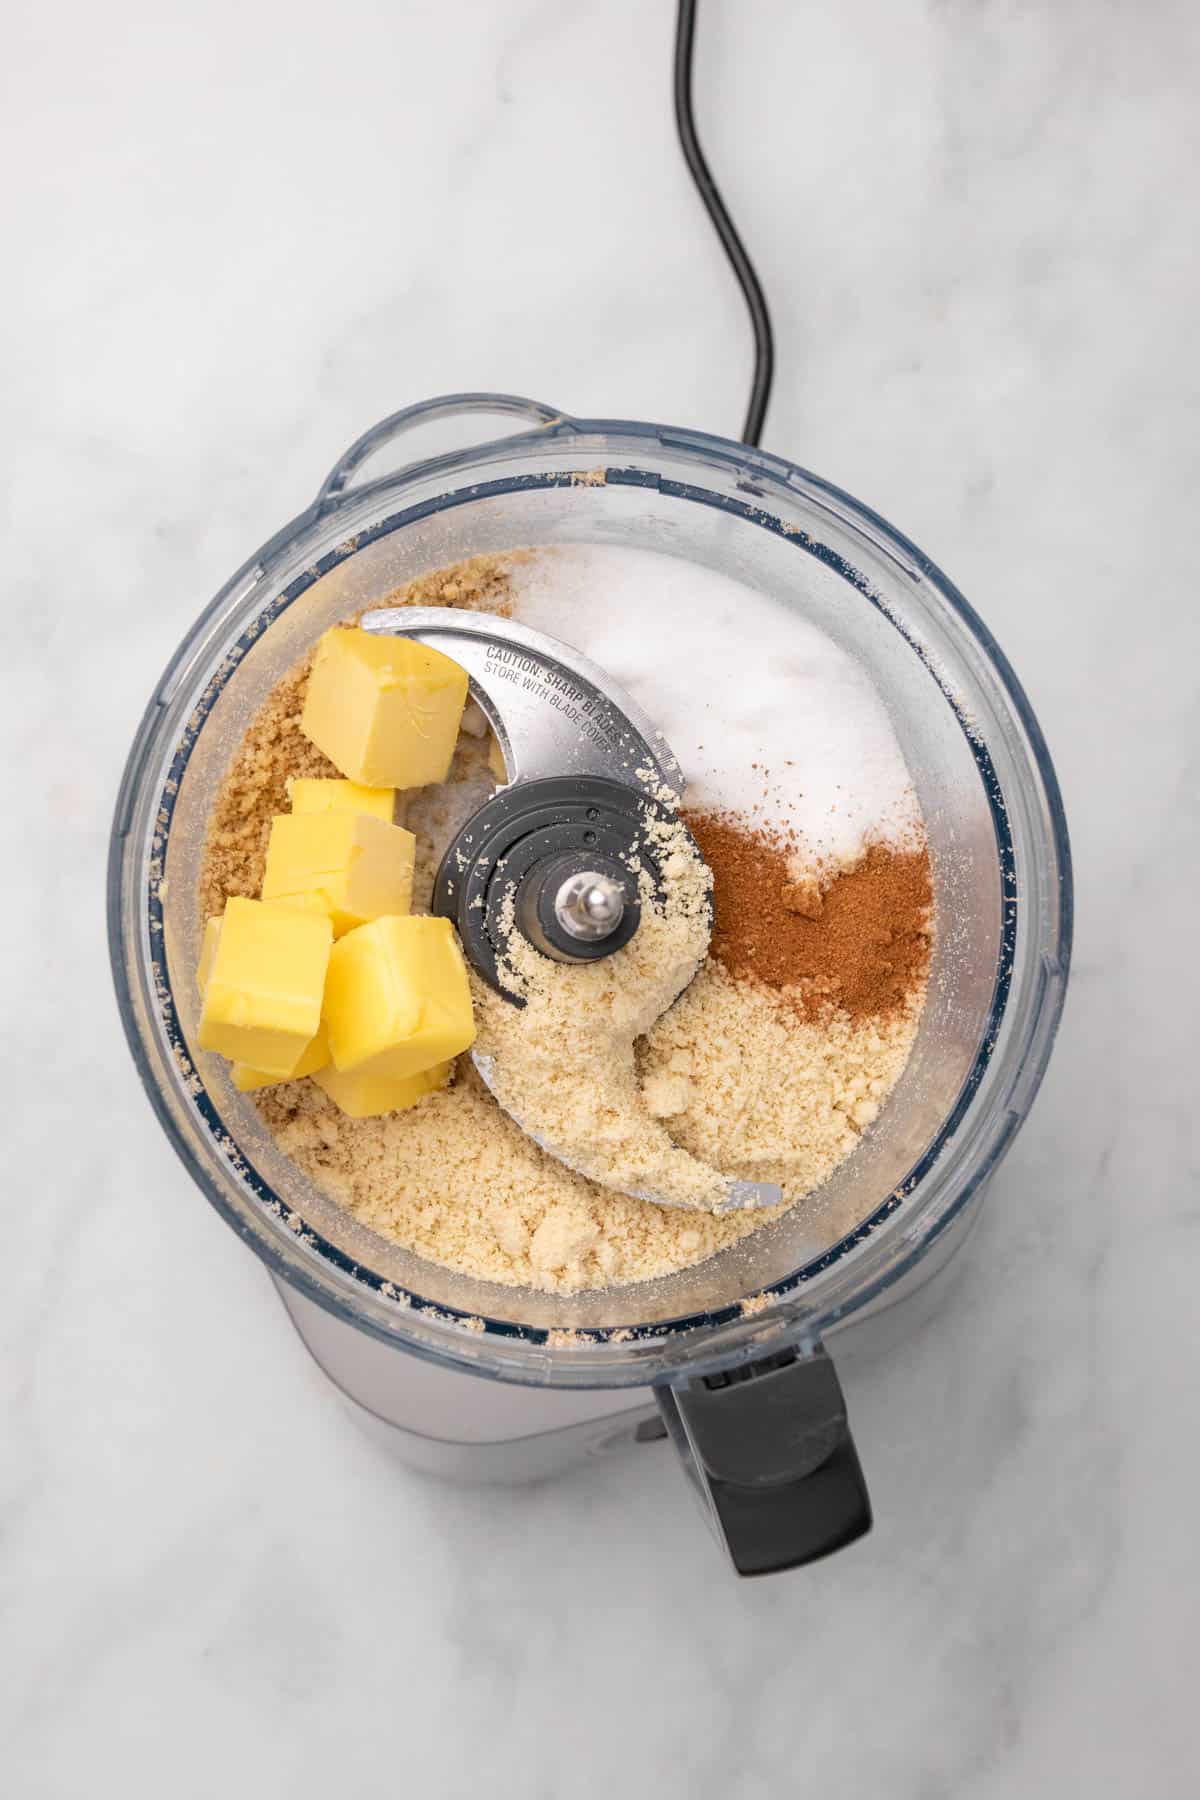 Topping ingredients in a food processor, as seen from above